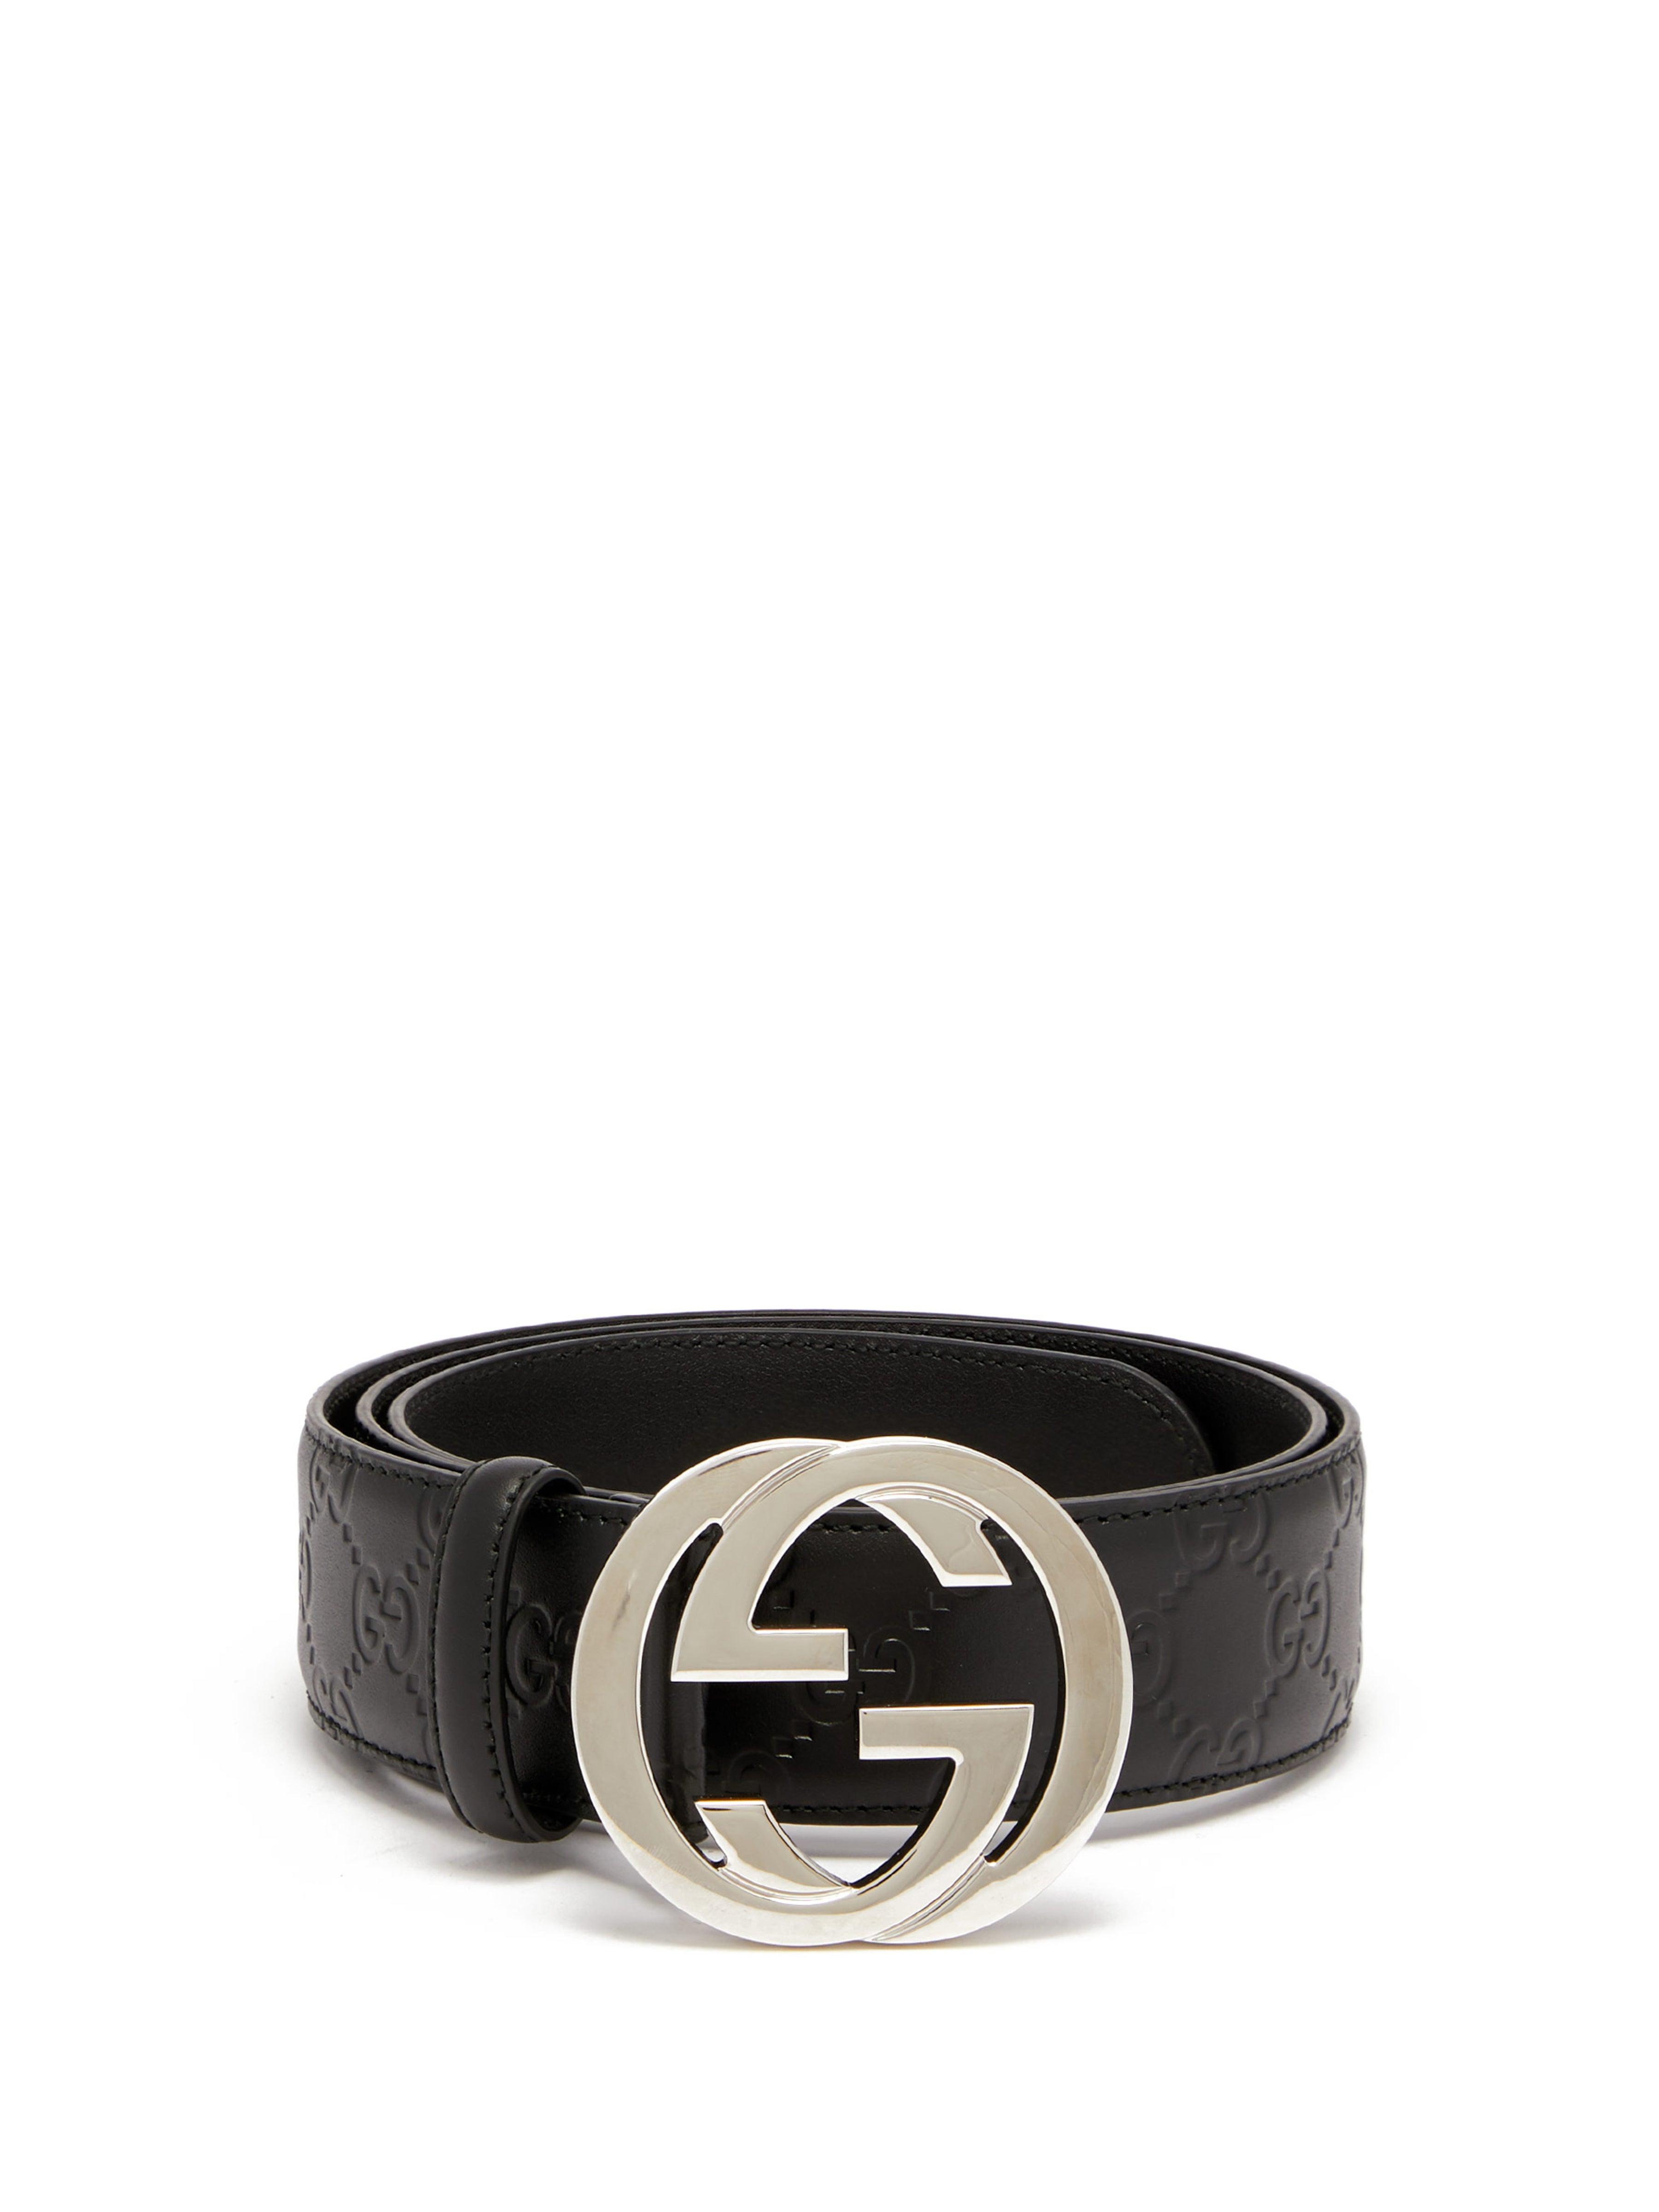 Gucci Signature Gg Logo Leather Belt in Black for Men - Lyst